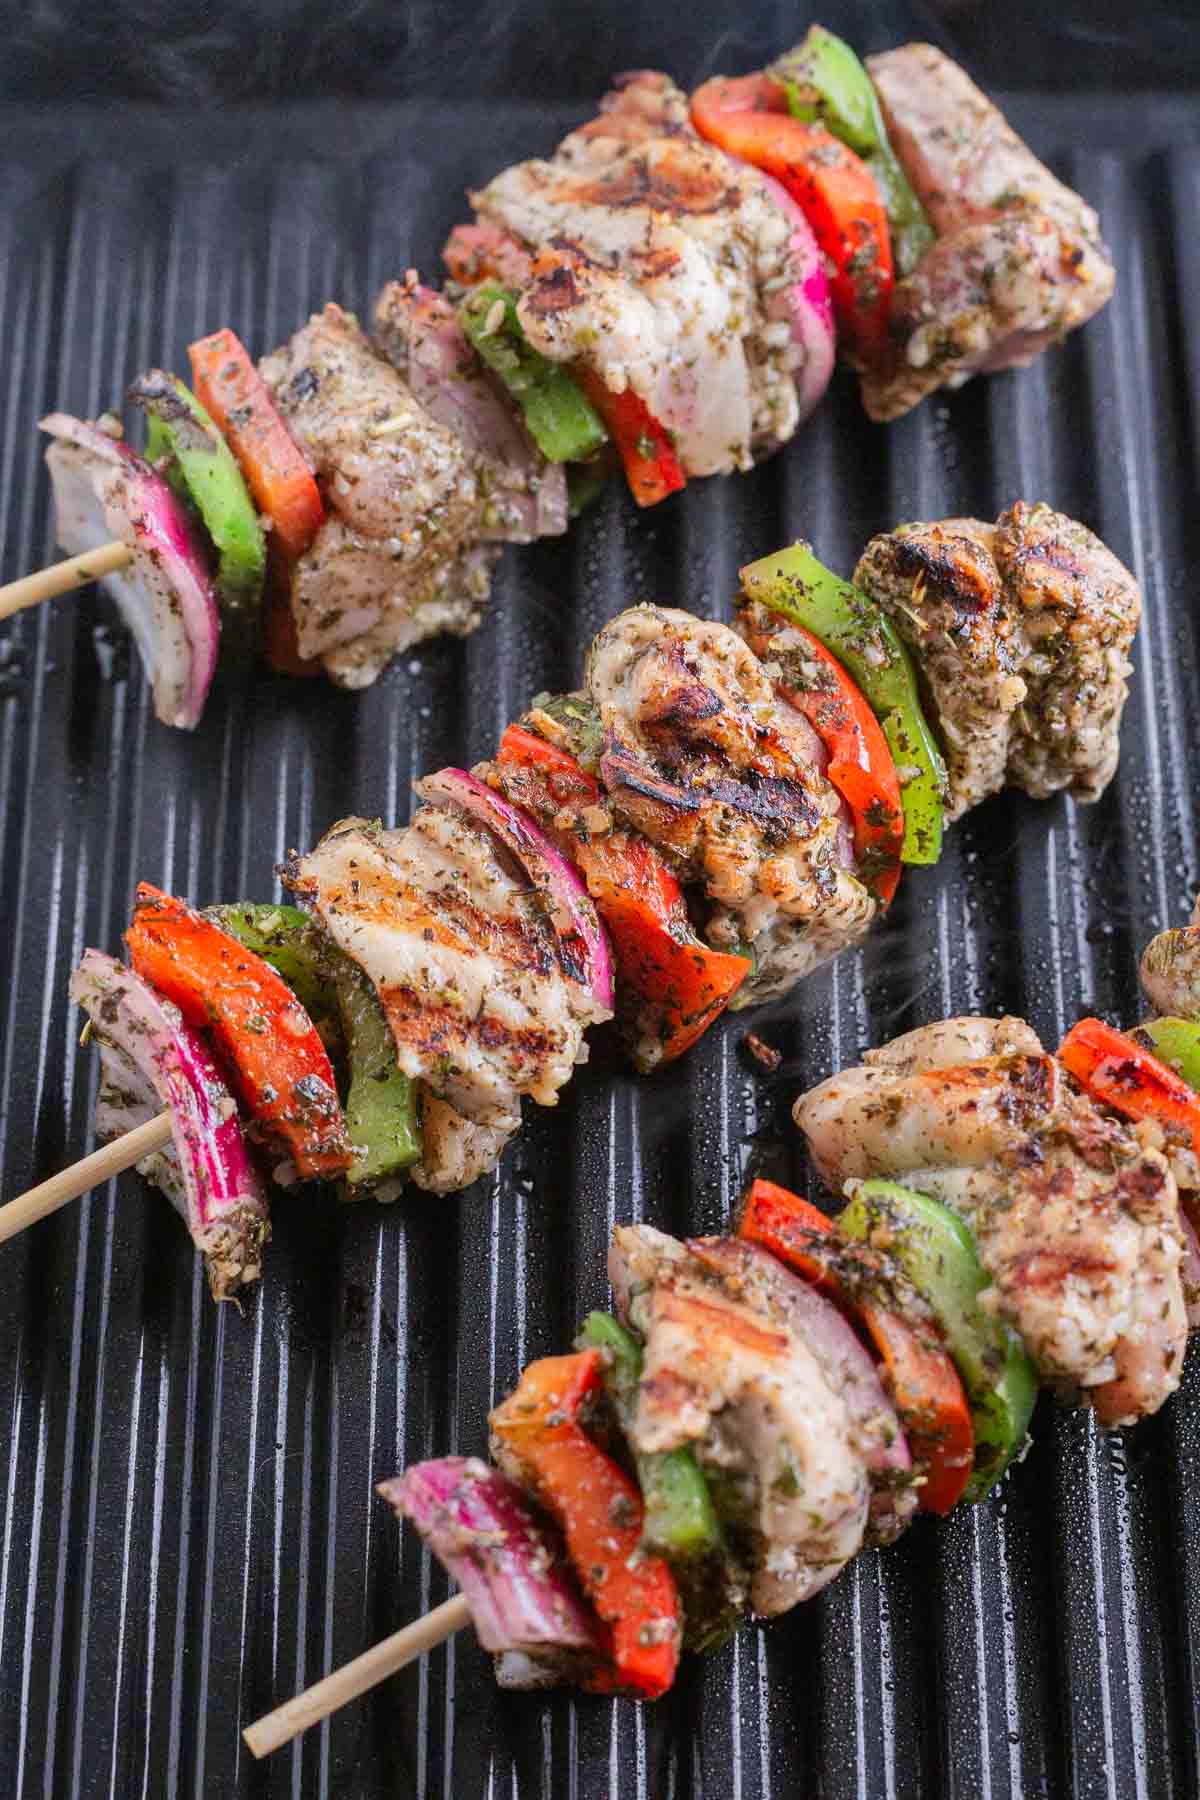 Marinated chicken and vegetable kabobs are grilled.